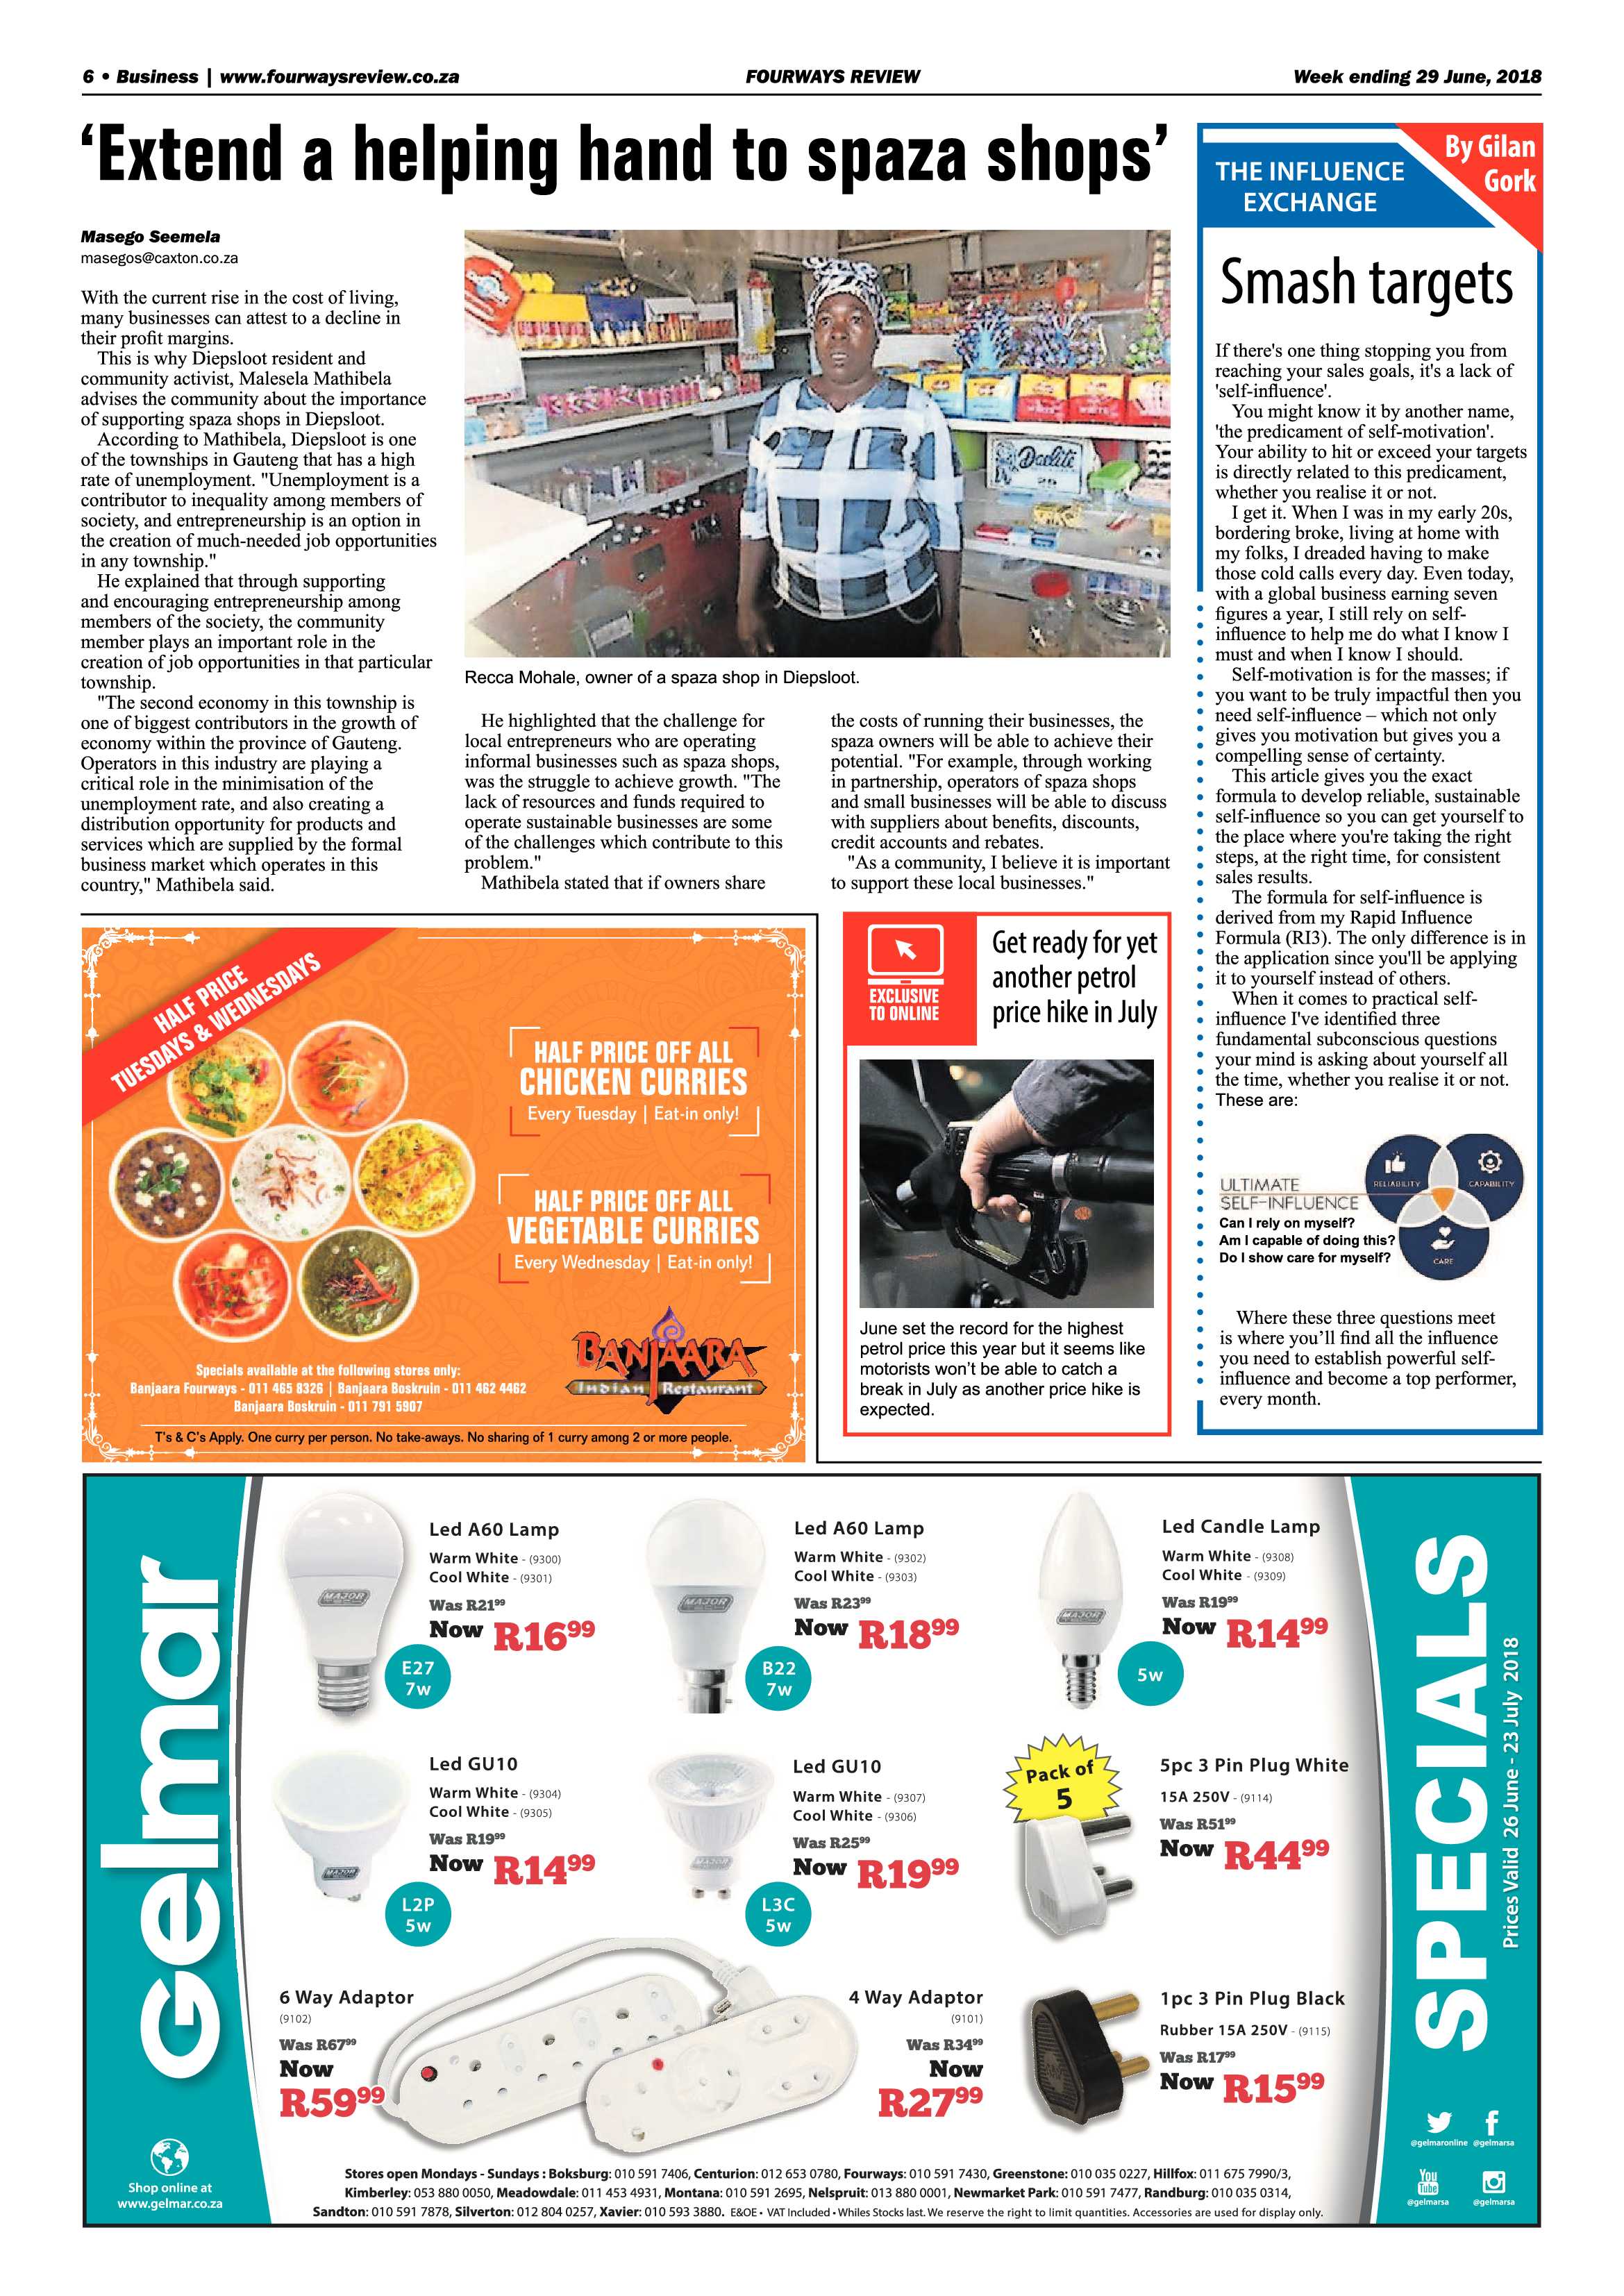 Fourways Review 29 June, 2018 page 6